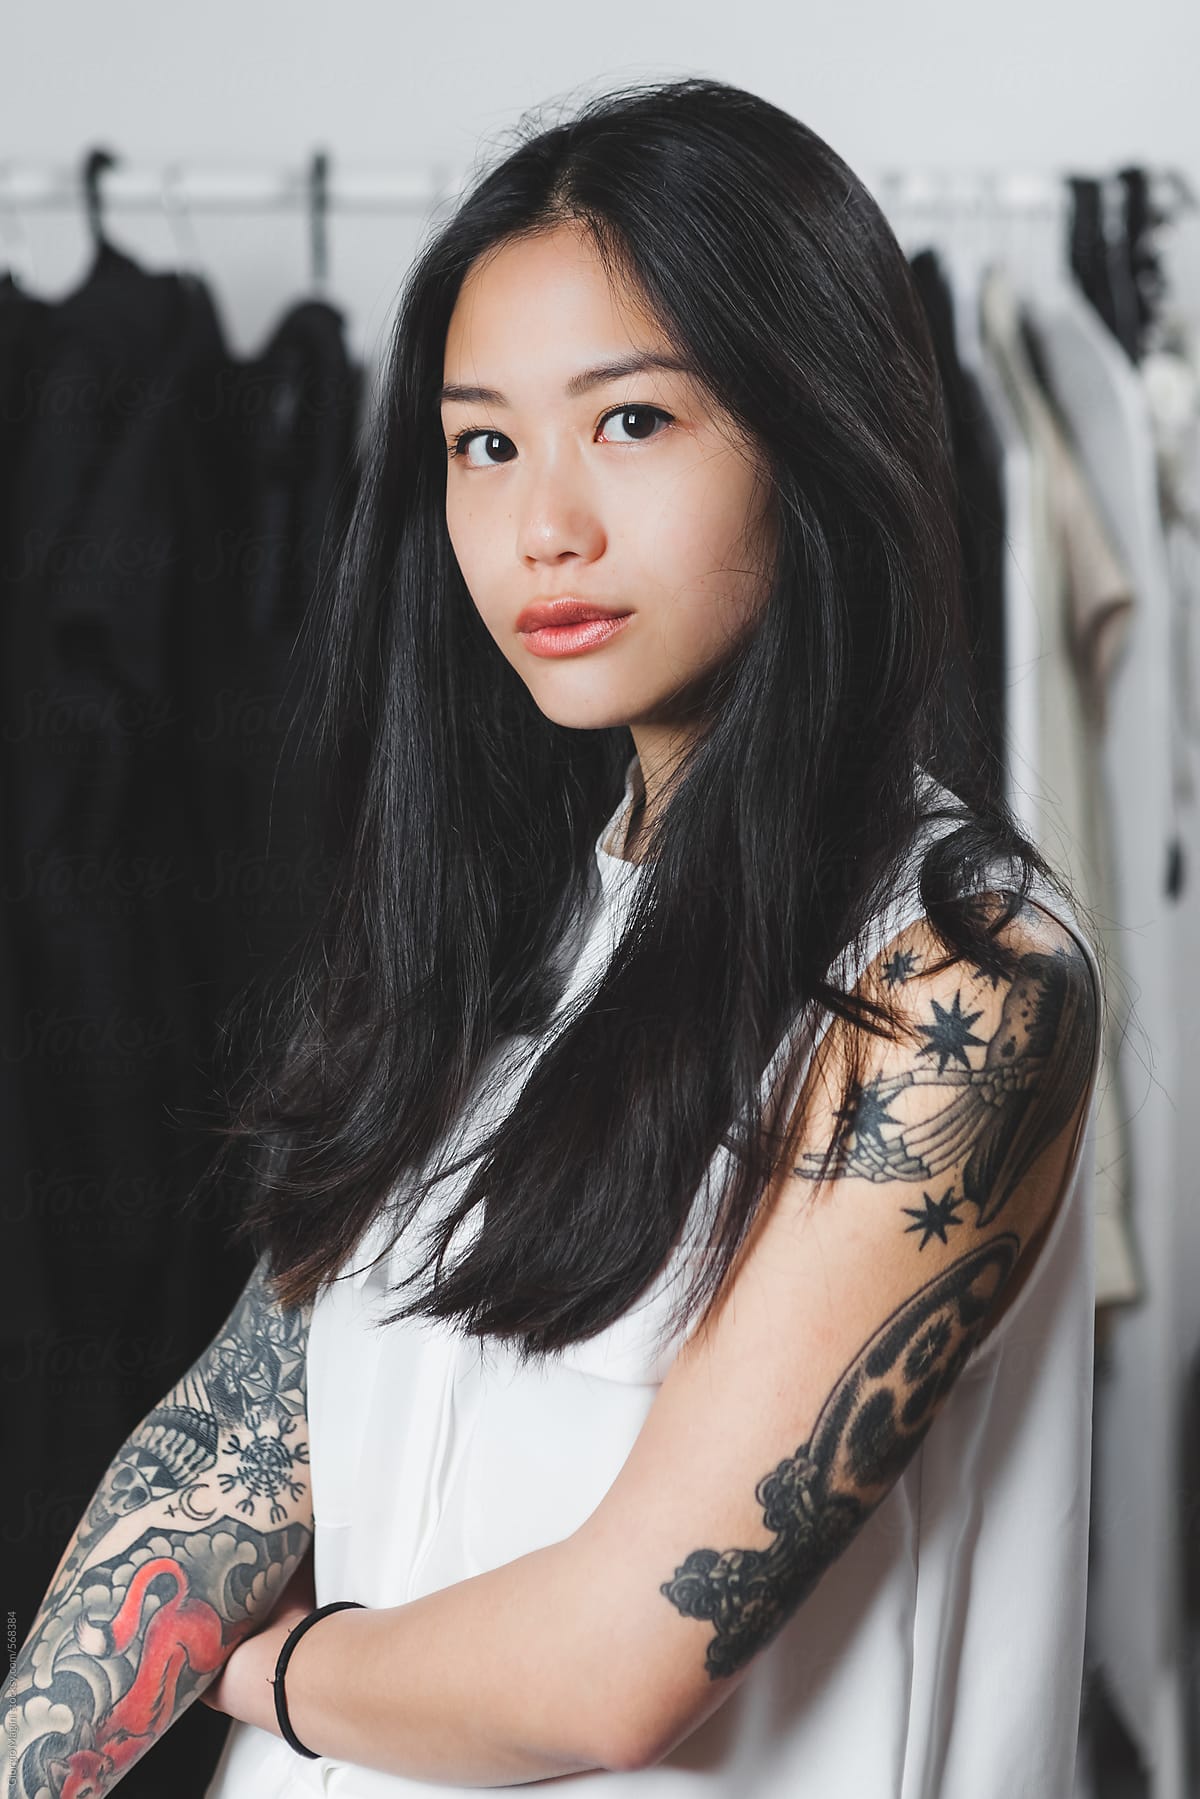 Portrait Of A Young Asian Fashion Designer With Many Tattoos By 